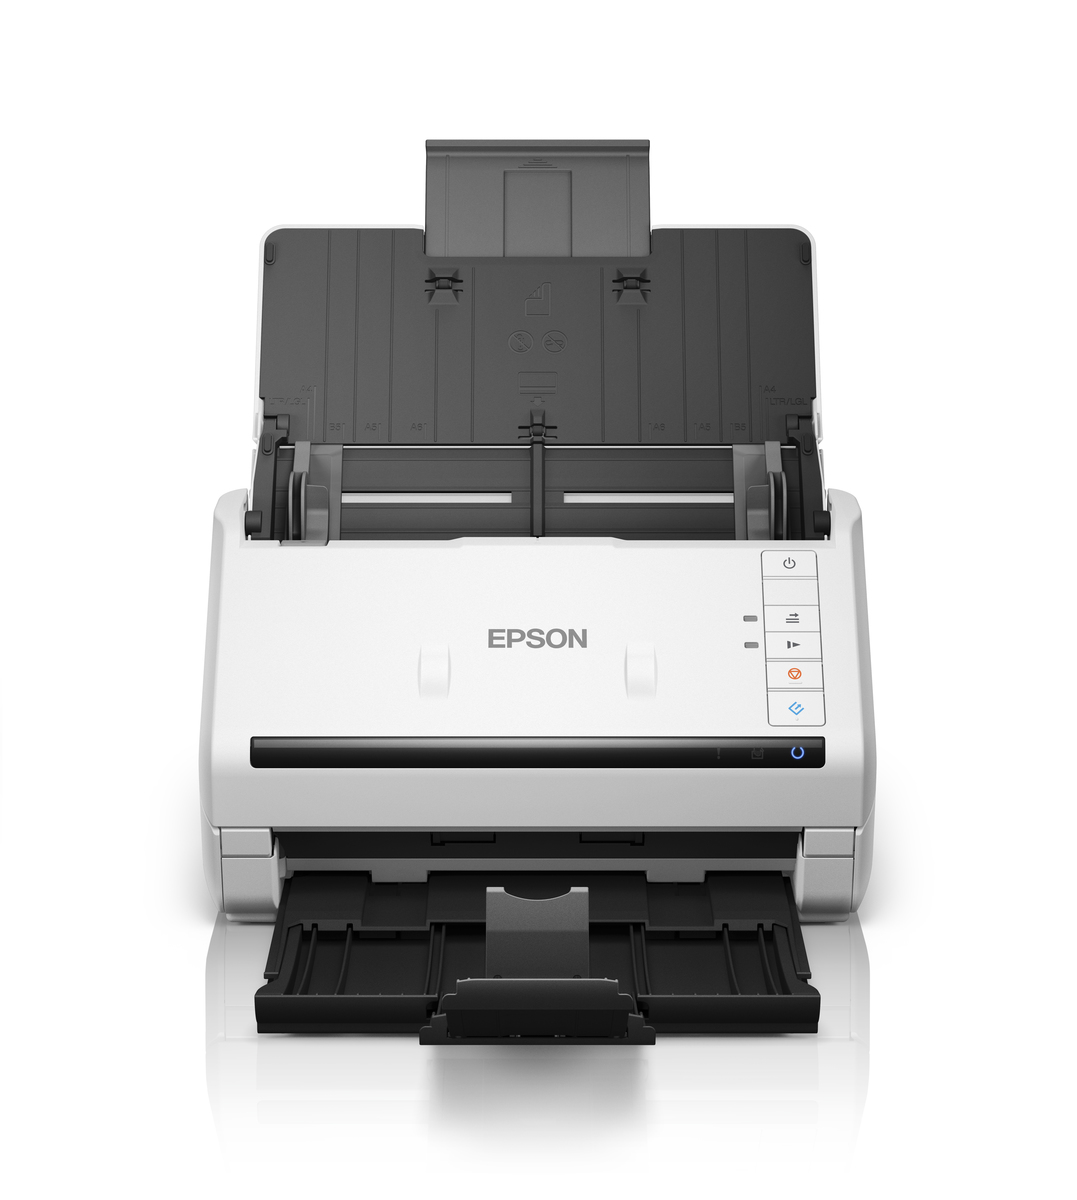 Epson Workforce Ds 530 A4 Sheetfeed Scanner Document Scanners Scanners For Work Epson 6547